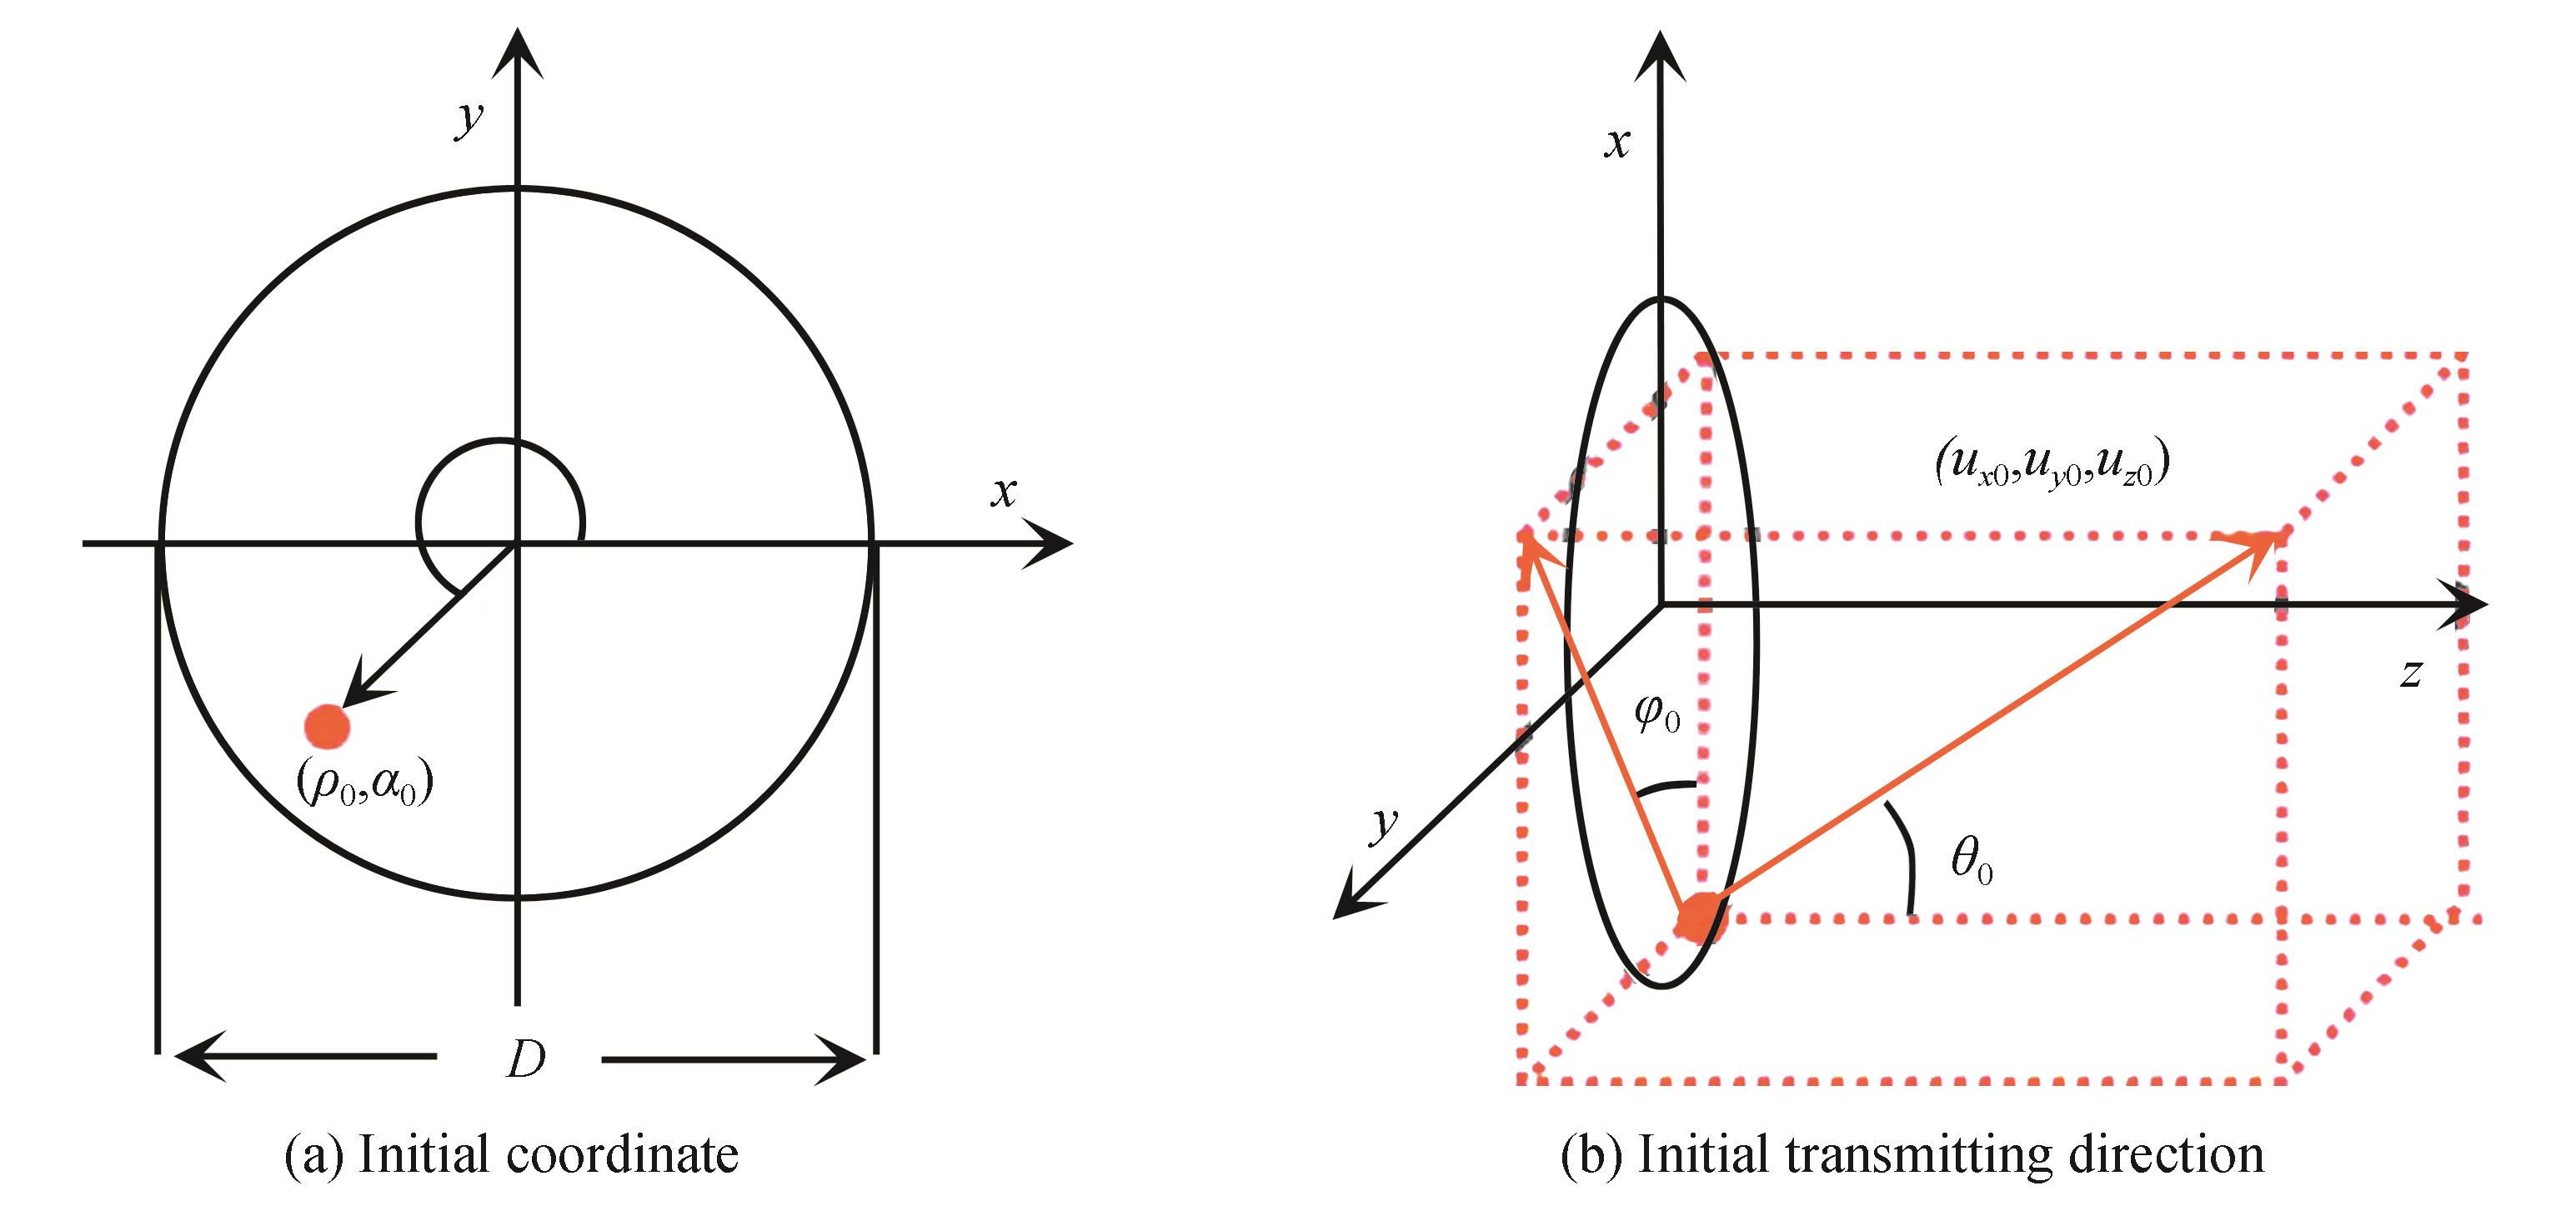 Schematic diagram of the photon initial coordinate and initial transmitting direction